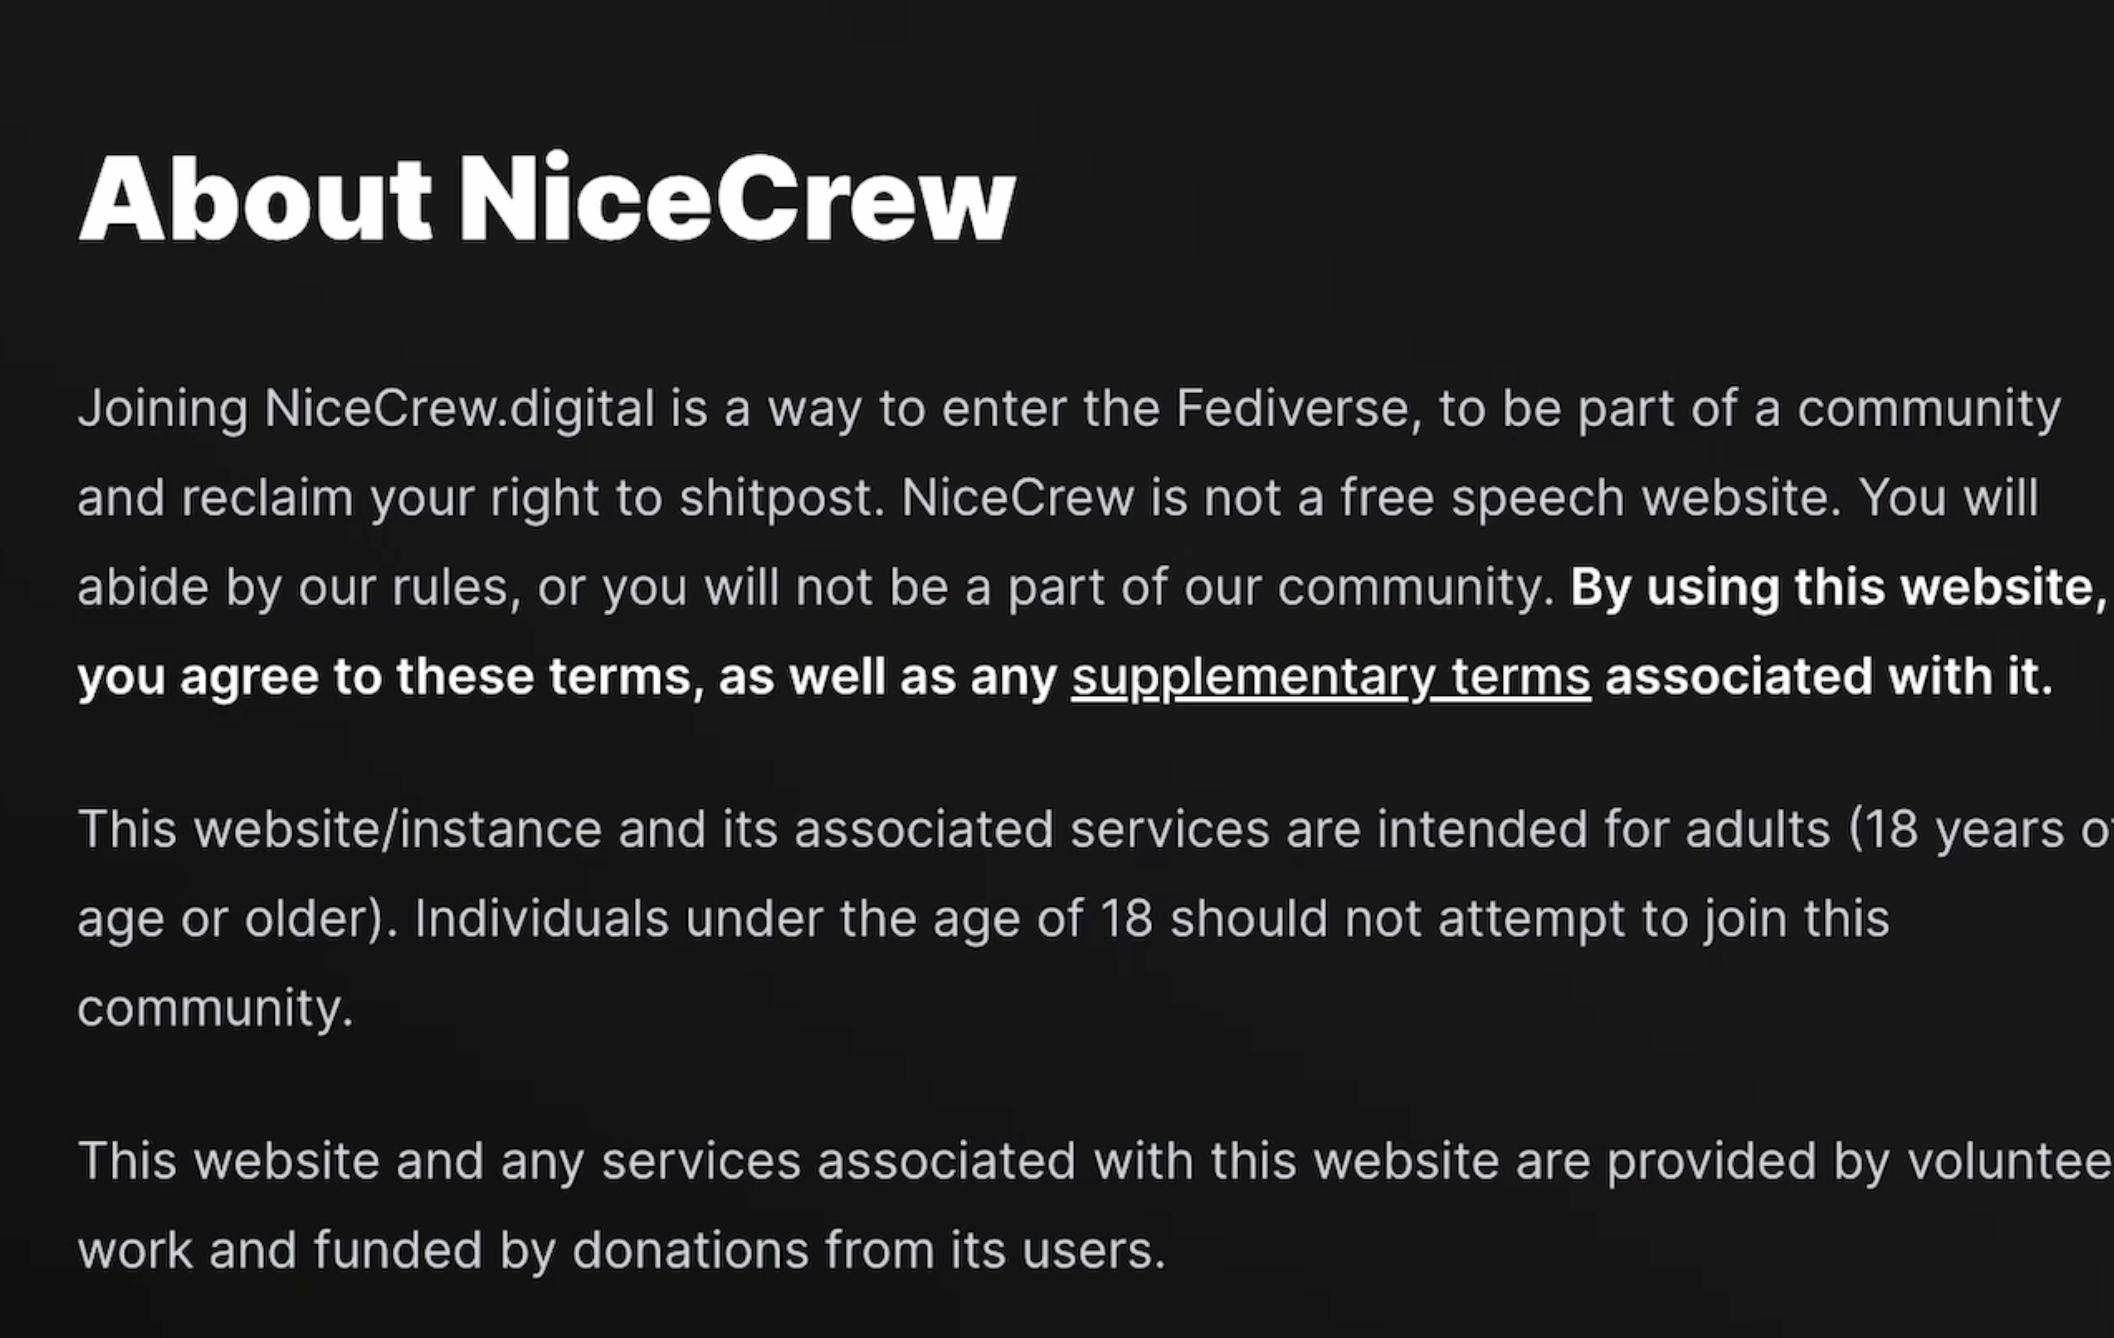 Screenshot of the "About NiceCrew" page on Poast. Says that NiceCrew.digital is a way "to be part of a community and reclaim your right to shitpost." It also says "this website...is intended for adults (18 years of age or older). Individuals under the age of 18 should not attempt to join this community." It also warns, "You will abide by our rules, or you will not be part of our community."